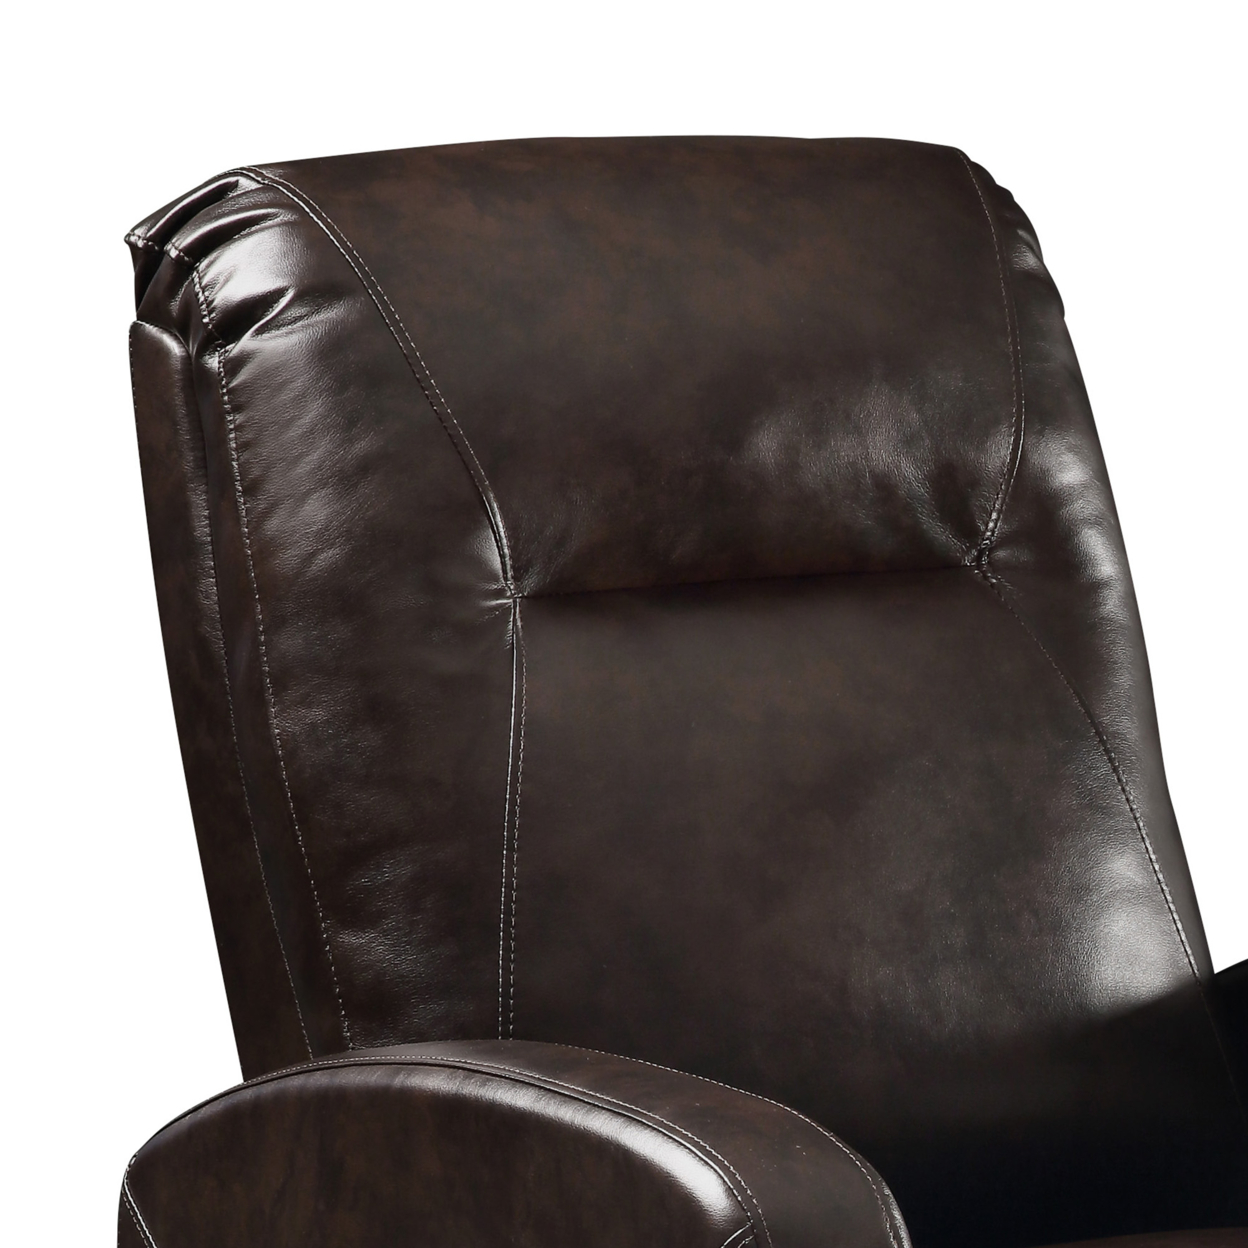 Faux Leather Upholstered Wooden Recliner With Power Lift, Brown- Saltoro Sherpi